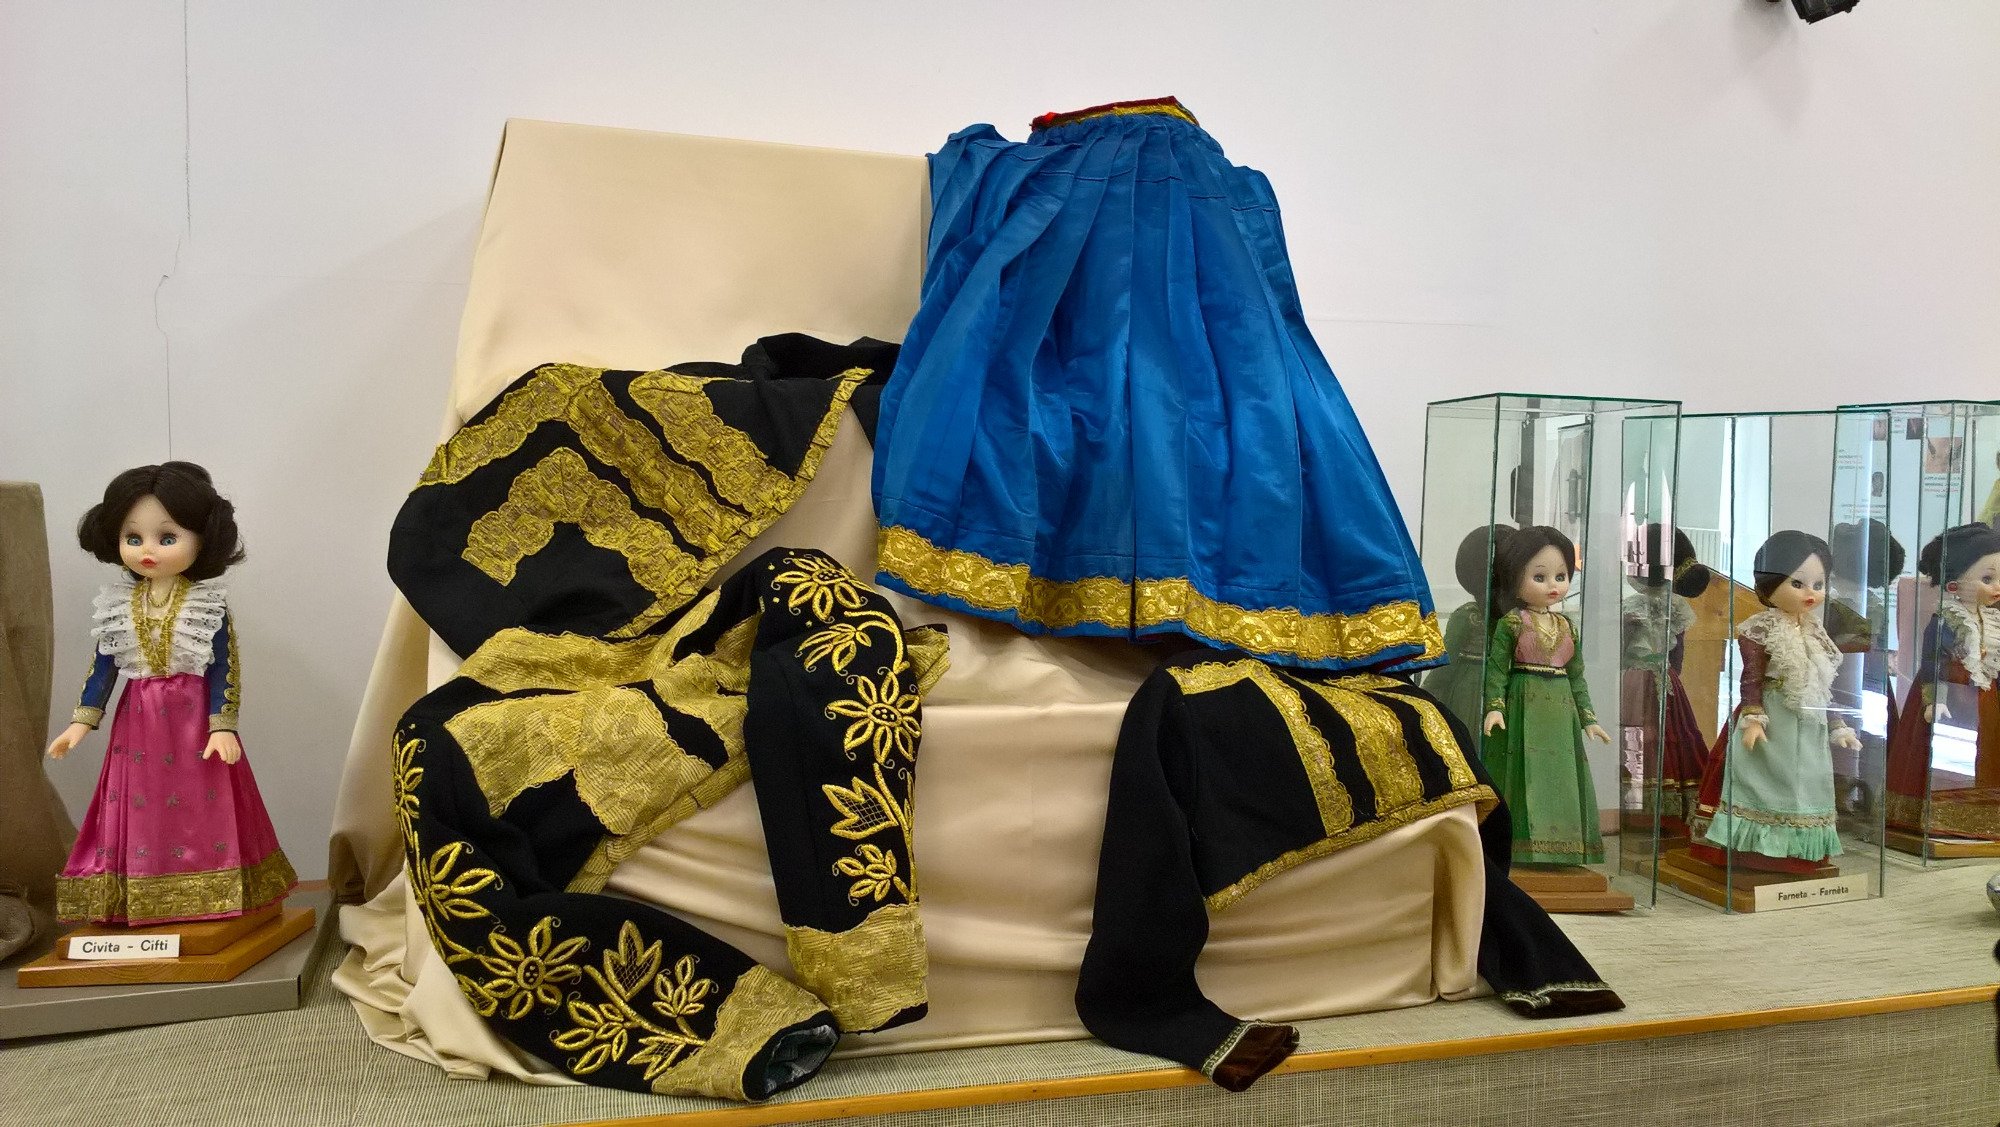 Museo del Costume Albanese